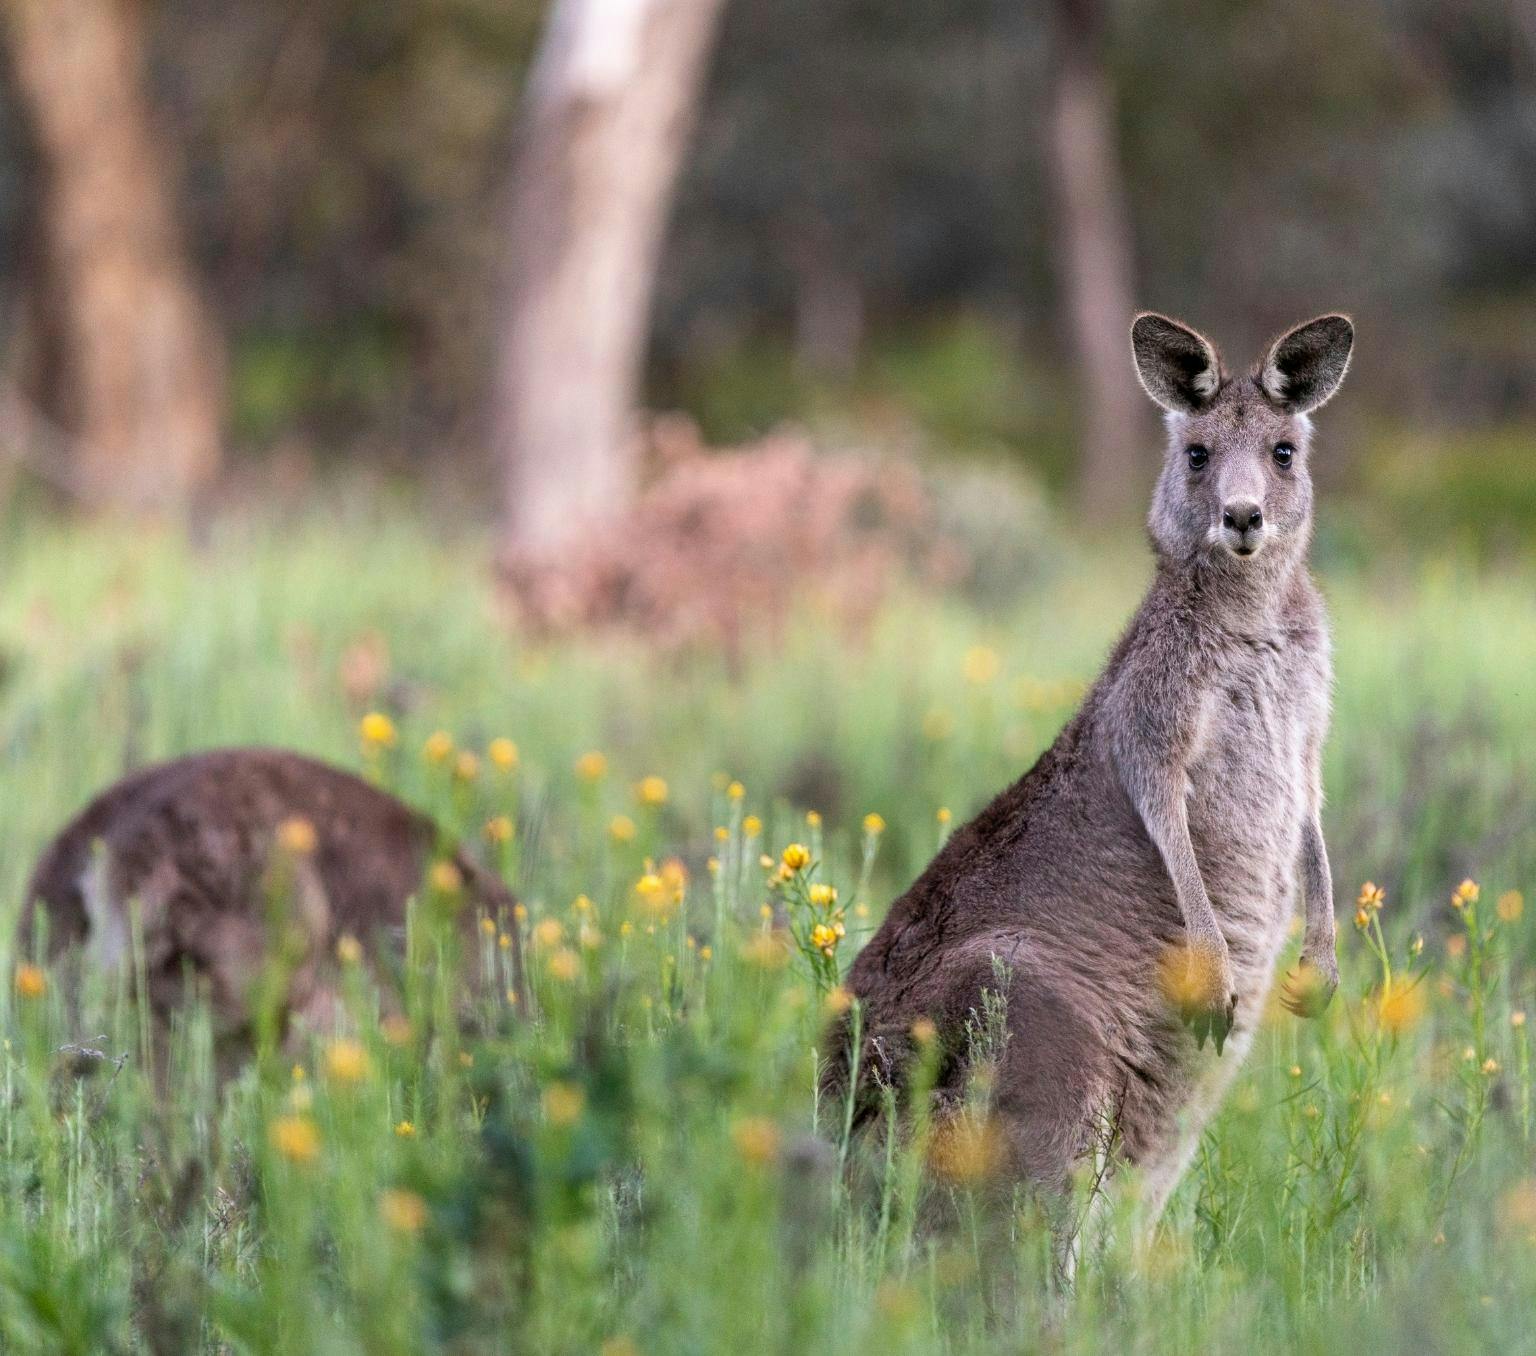 Two Eastern Gray kangaroos in Mount Ainsle Nature Reserve in Canberra. One of the kangaroos is looking at the camera.